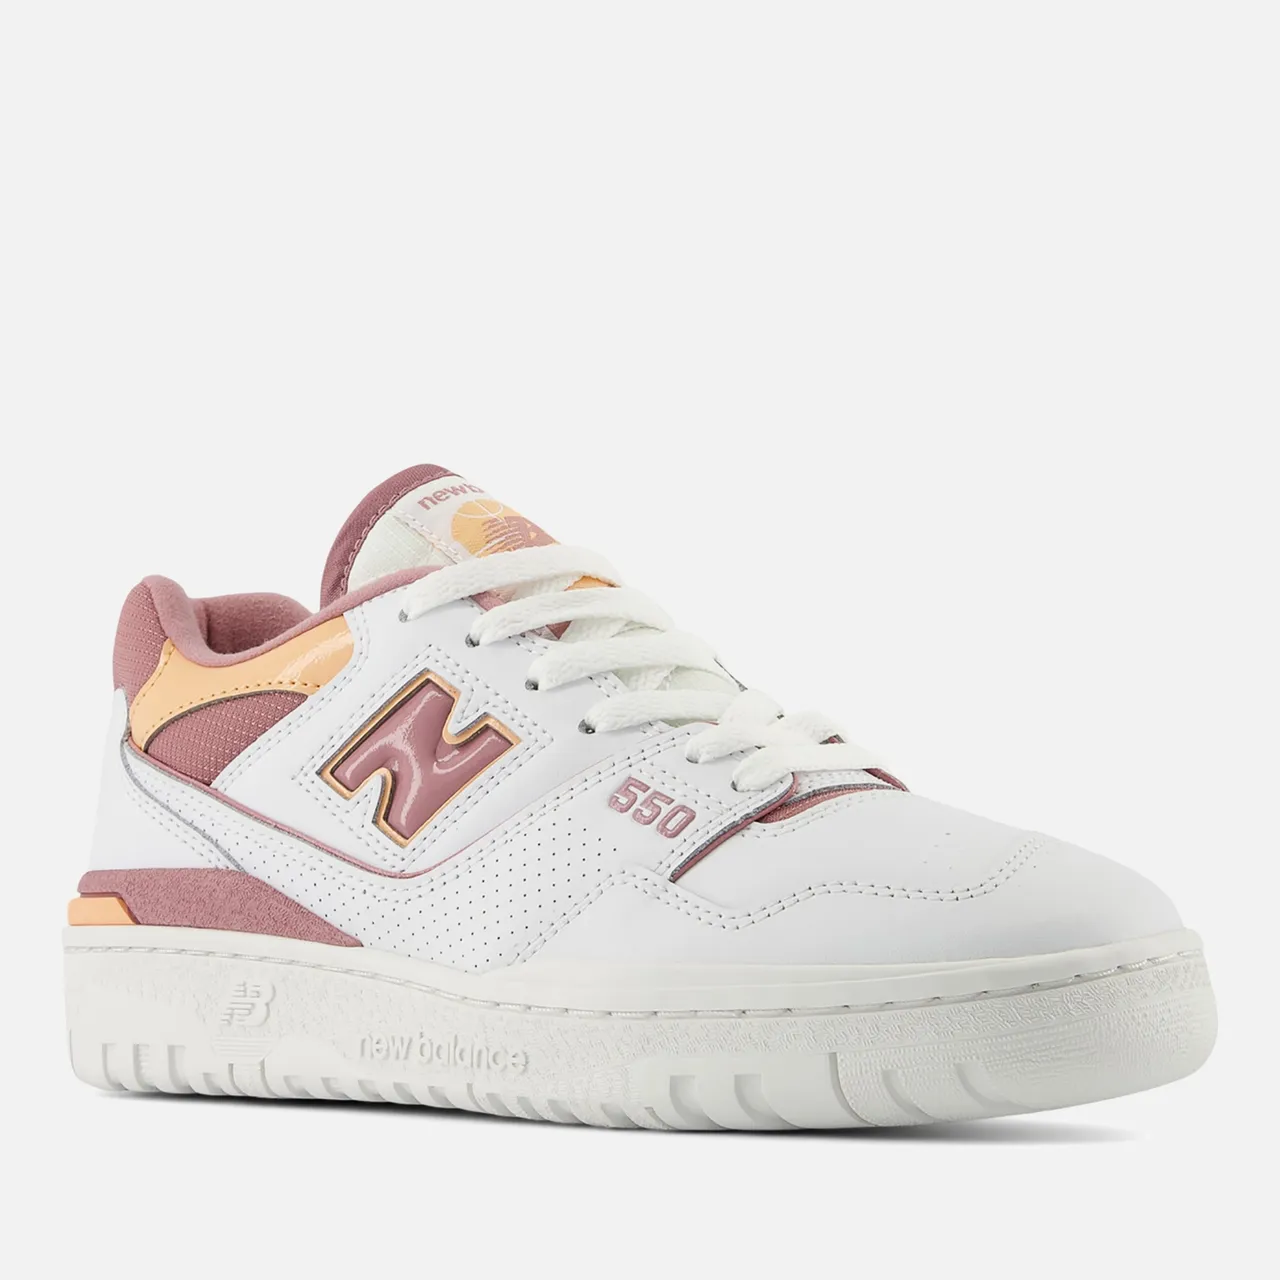 New Balance Women's 550 Leather Trainers